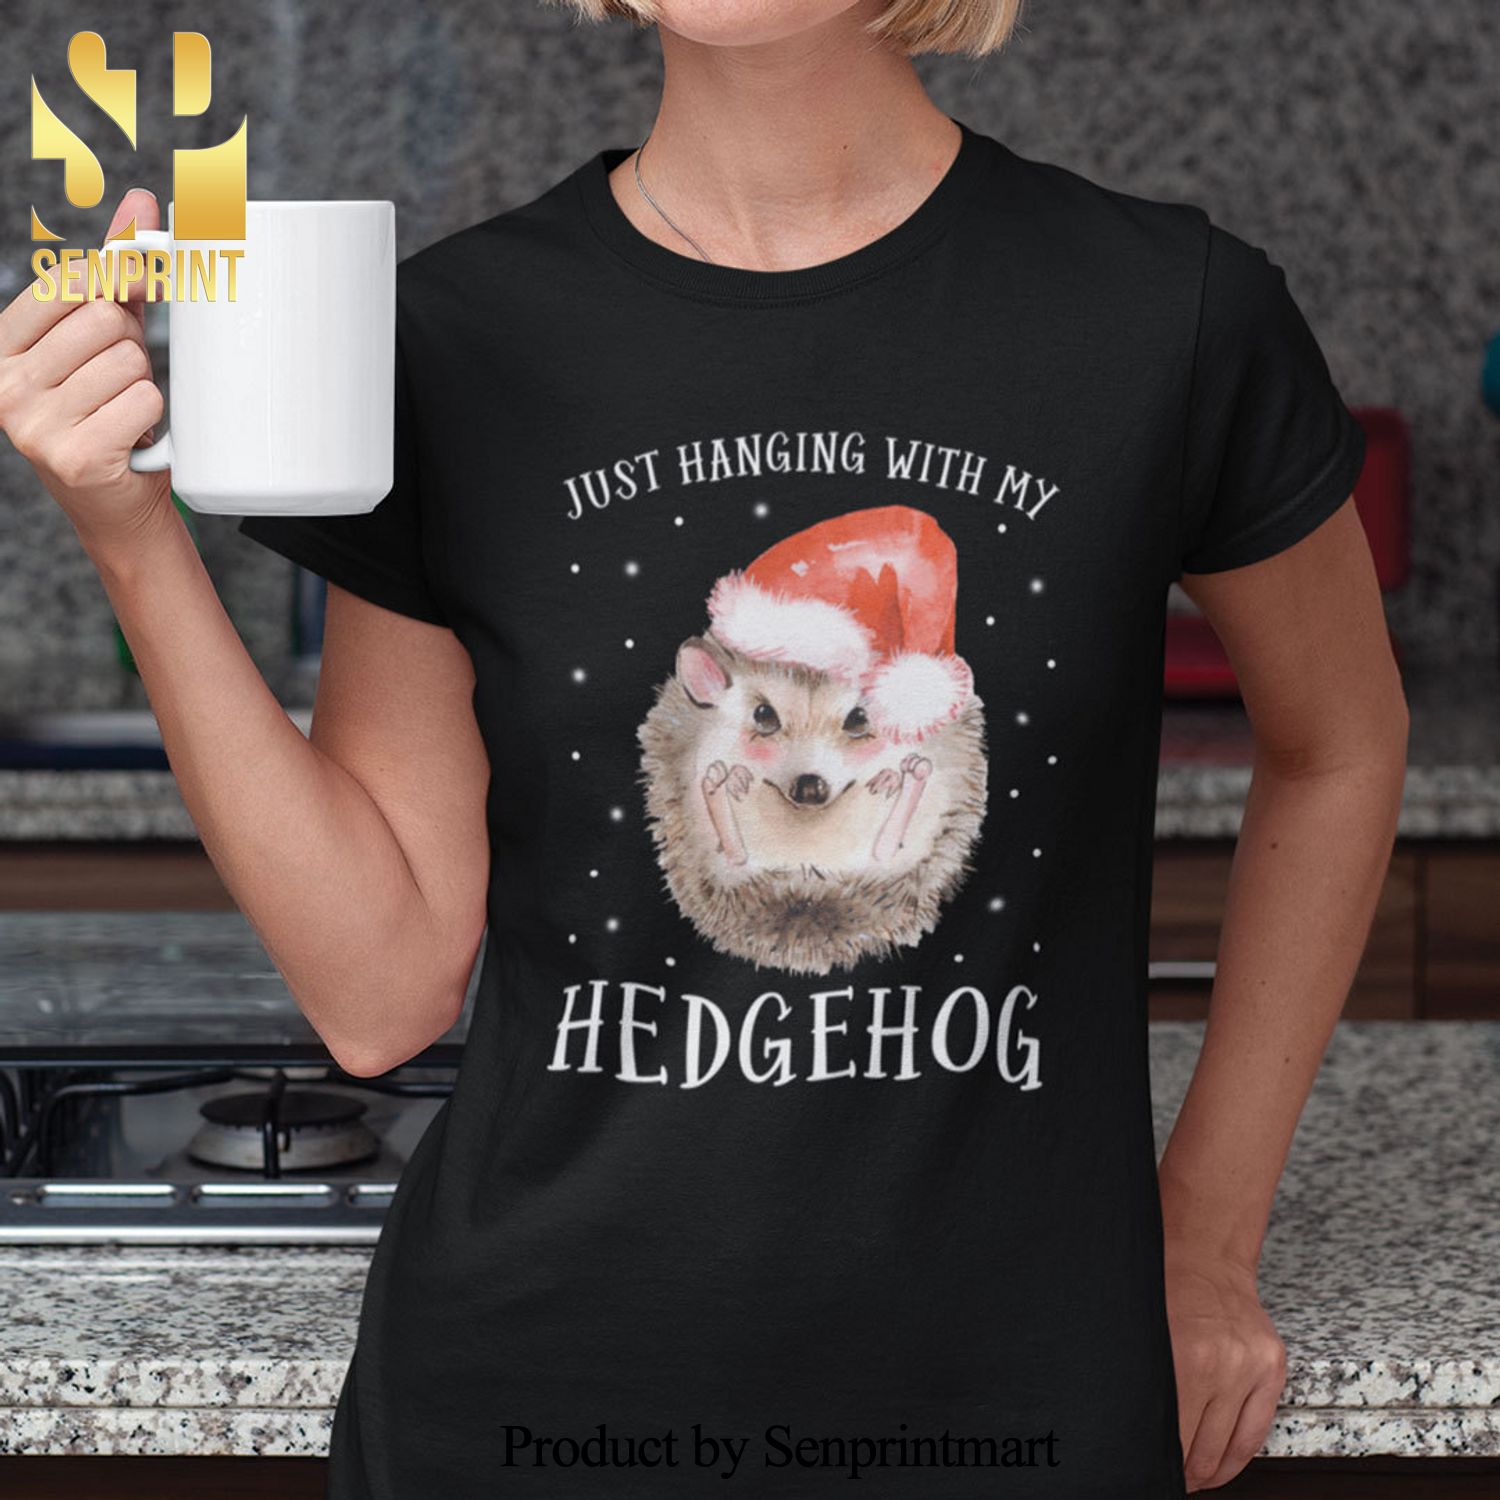 Hedgehog Christmas Gifts Shirt Just Hanging With My Hedgehog